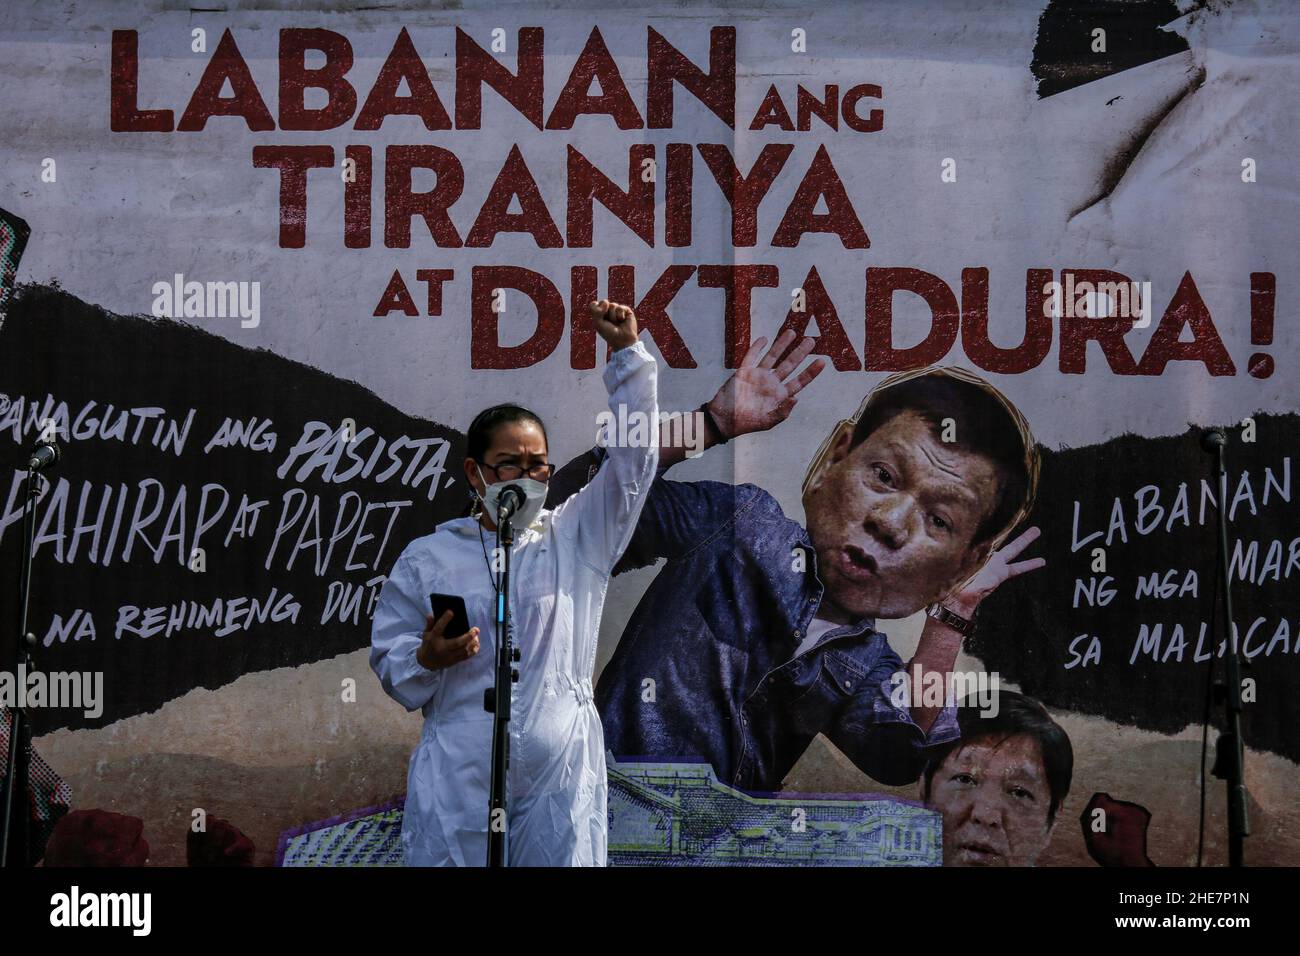 Protesters carry signs during a protest to mark the 73rd International Human Rights Day at the University of the Philippines in Quezon City, Metro Manila. Thousands of activists from various groups rallied against the implementation of the controversial anti-terror law and alleged human rights violations, including attacks on media workers and alleged extrajudicial killings in President Duterte's crackdown against illegal drugs. Philippines. Stock Photo